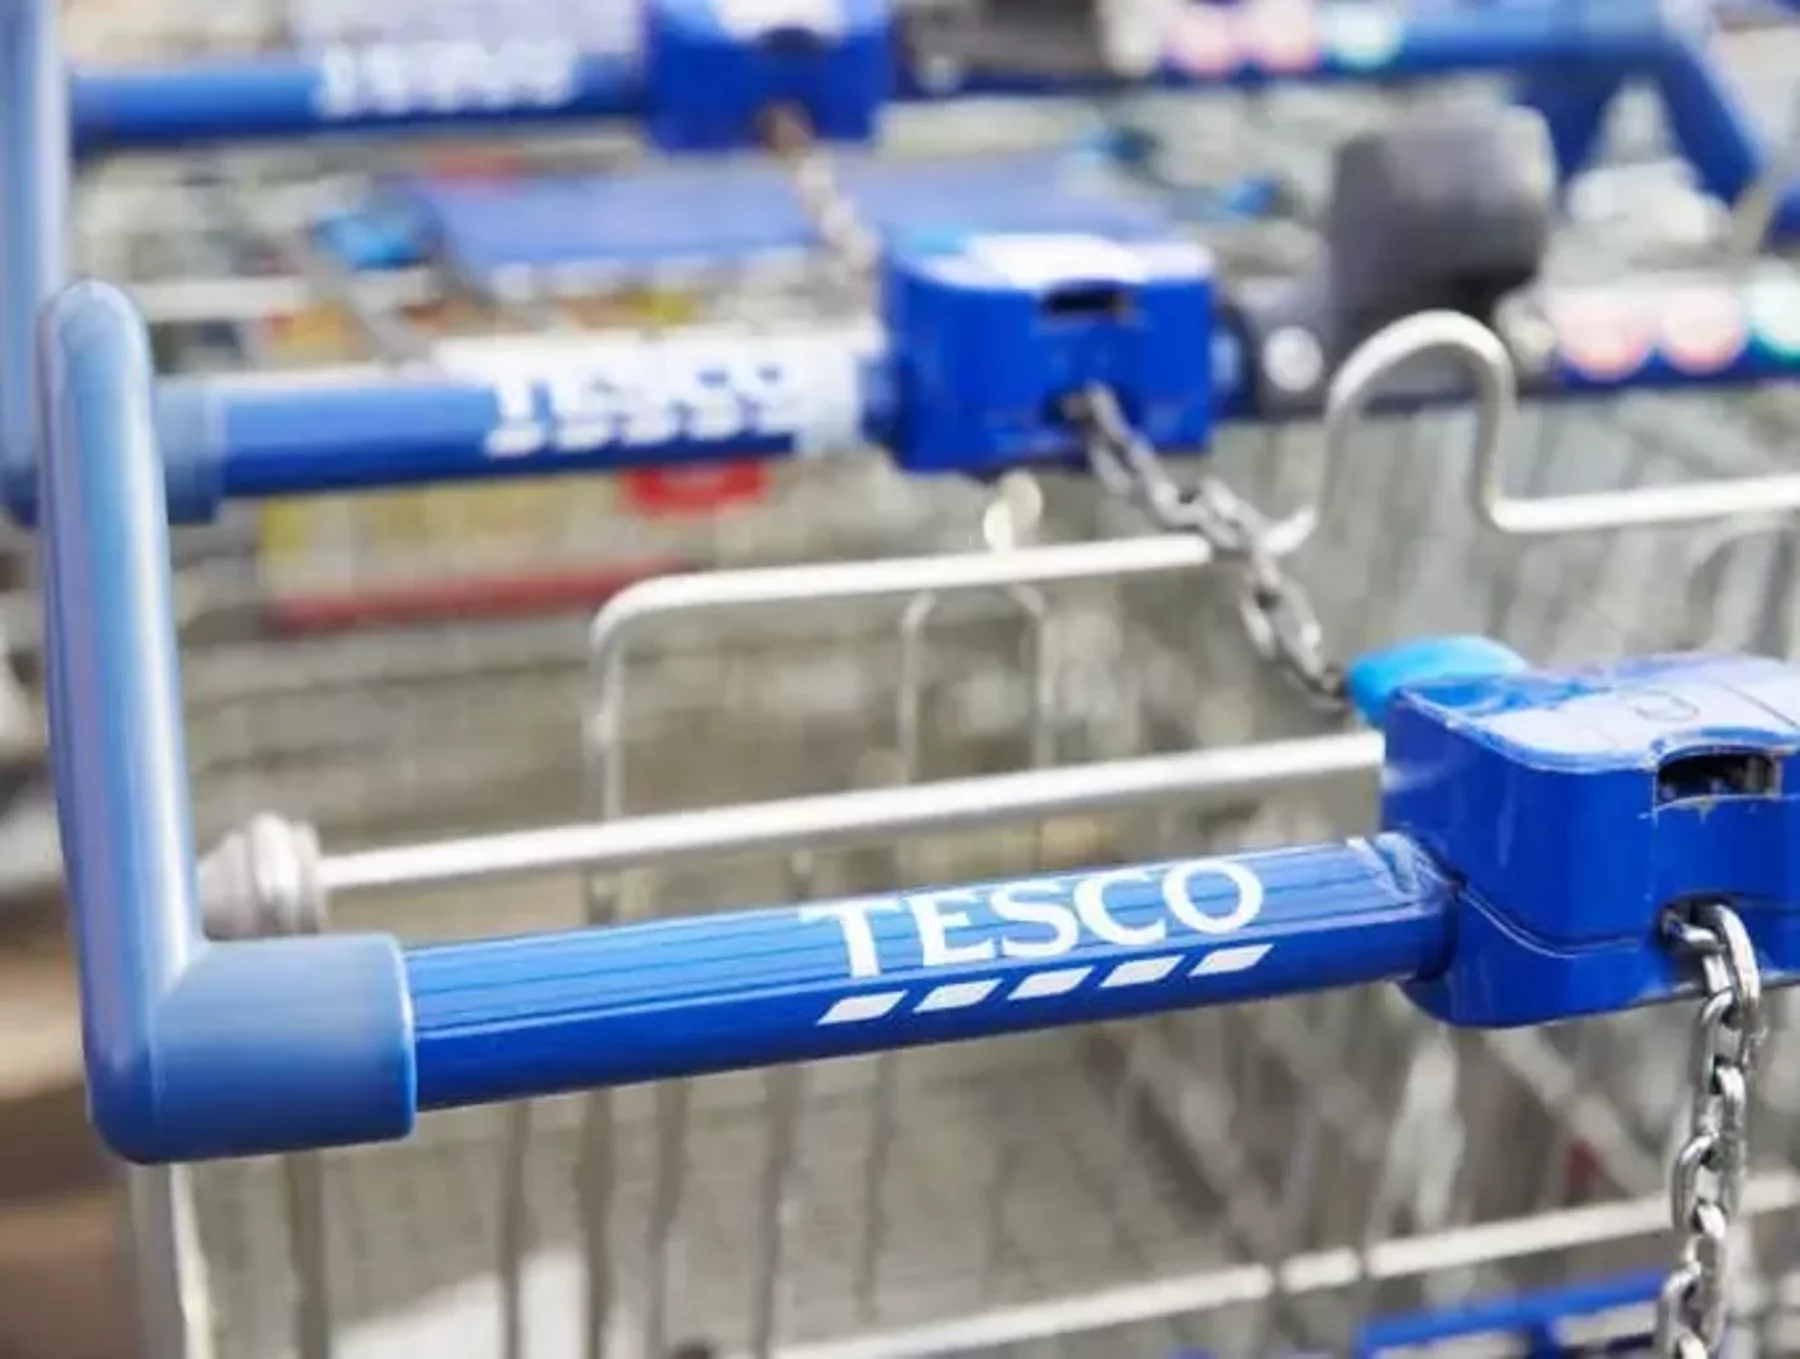 Tesco and Carrefour plan 'strategic alliance' to buy products